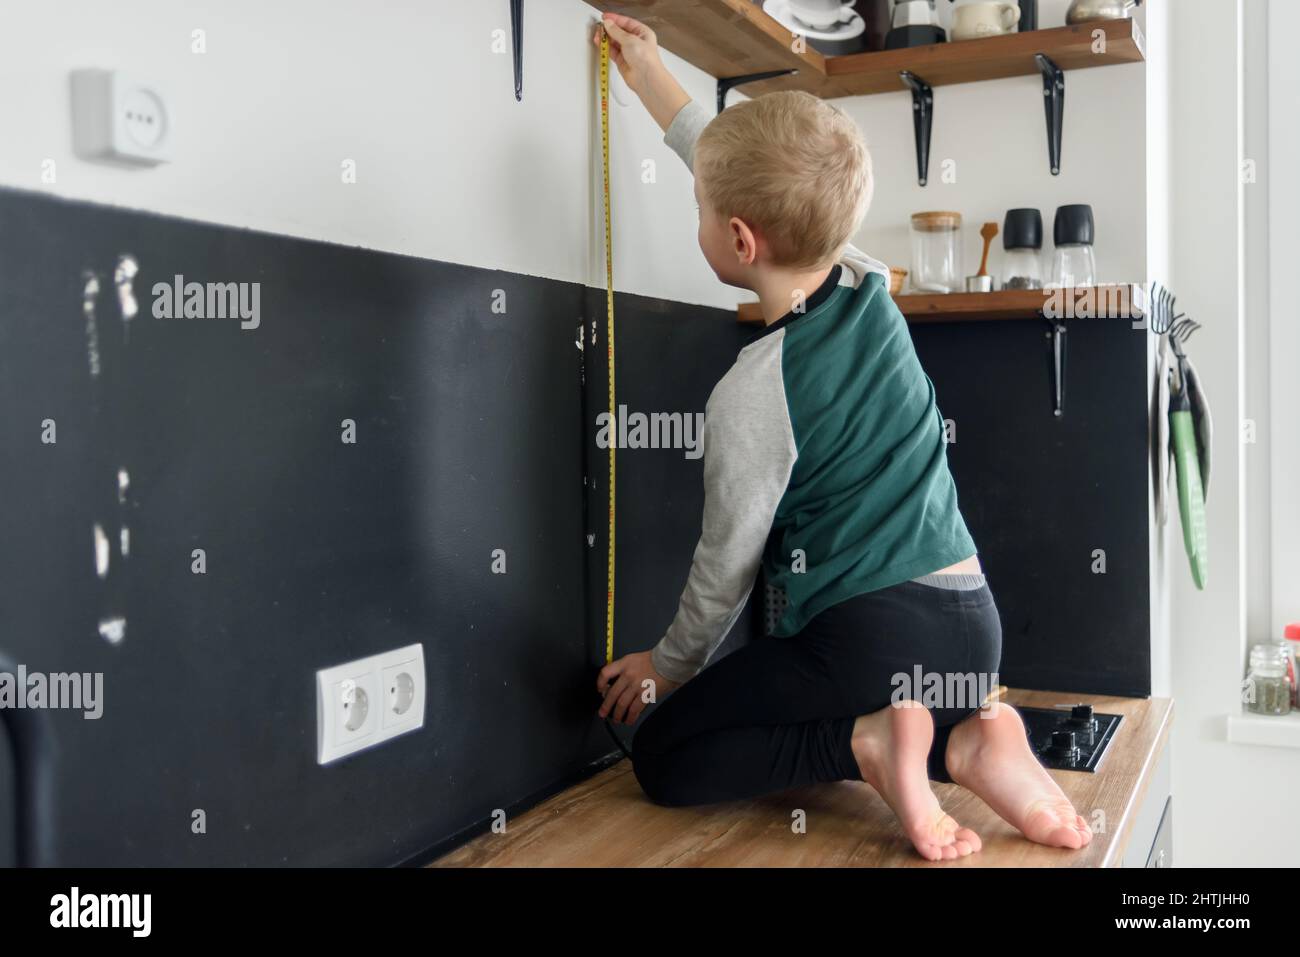 https://c8.alamy.com/comp/2HTJHH0/boy-child-using-metal-tape-measure-to-renovation-works-at-home-kitchen-2HTJHH0.jpg